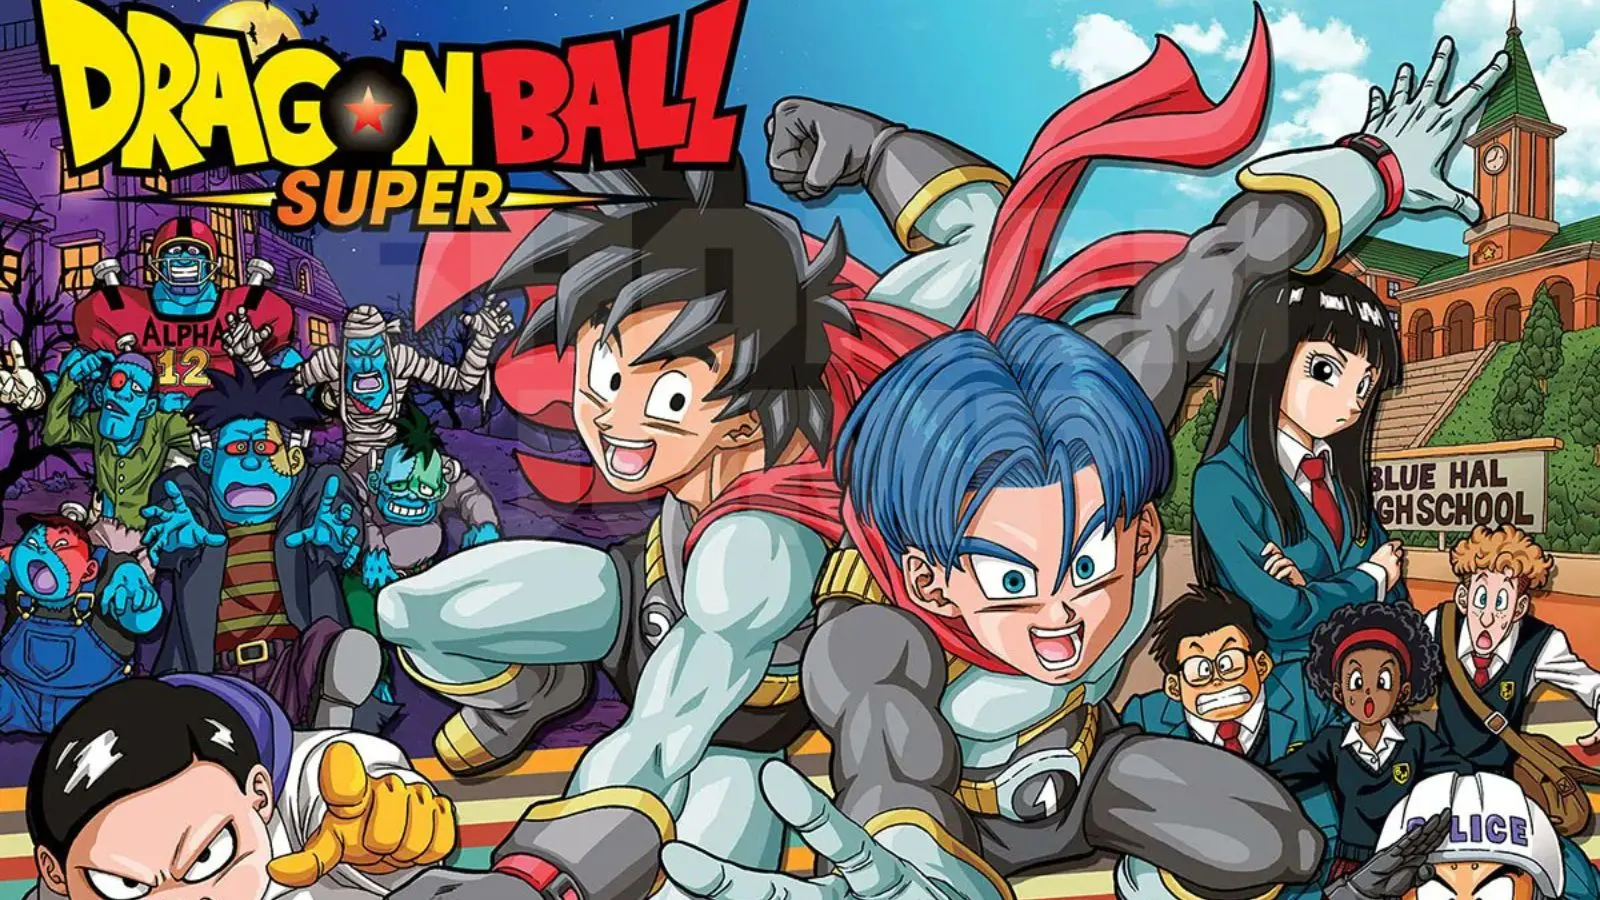 Exciting Update Dragon Ball Super Season 2 Promises Unmatched Action and New Transformations